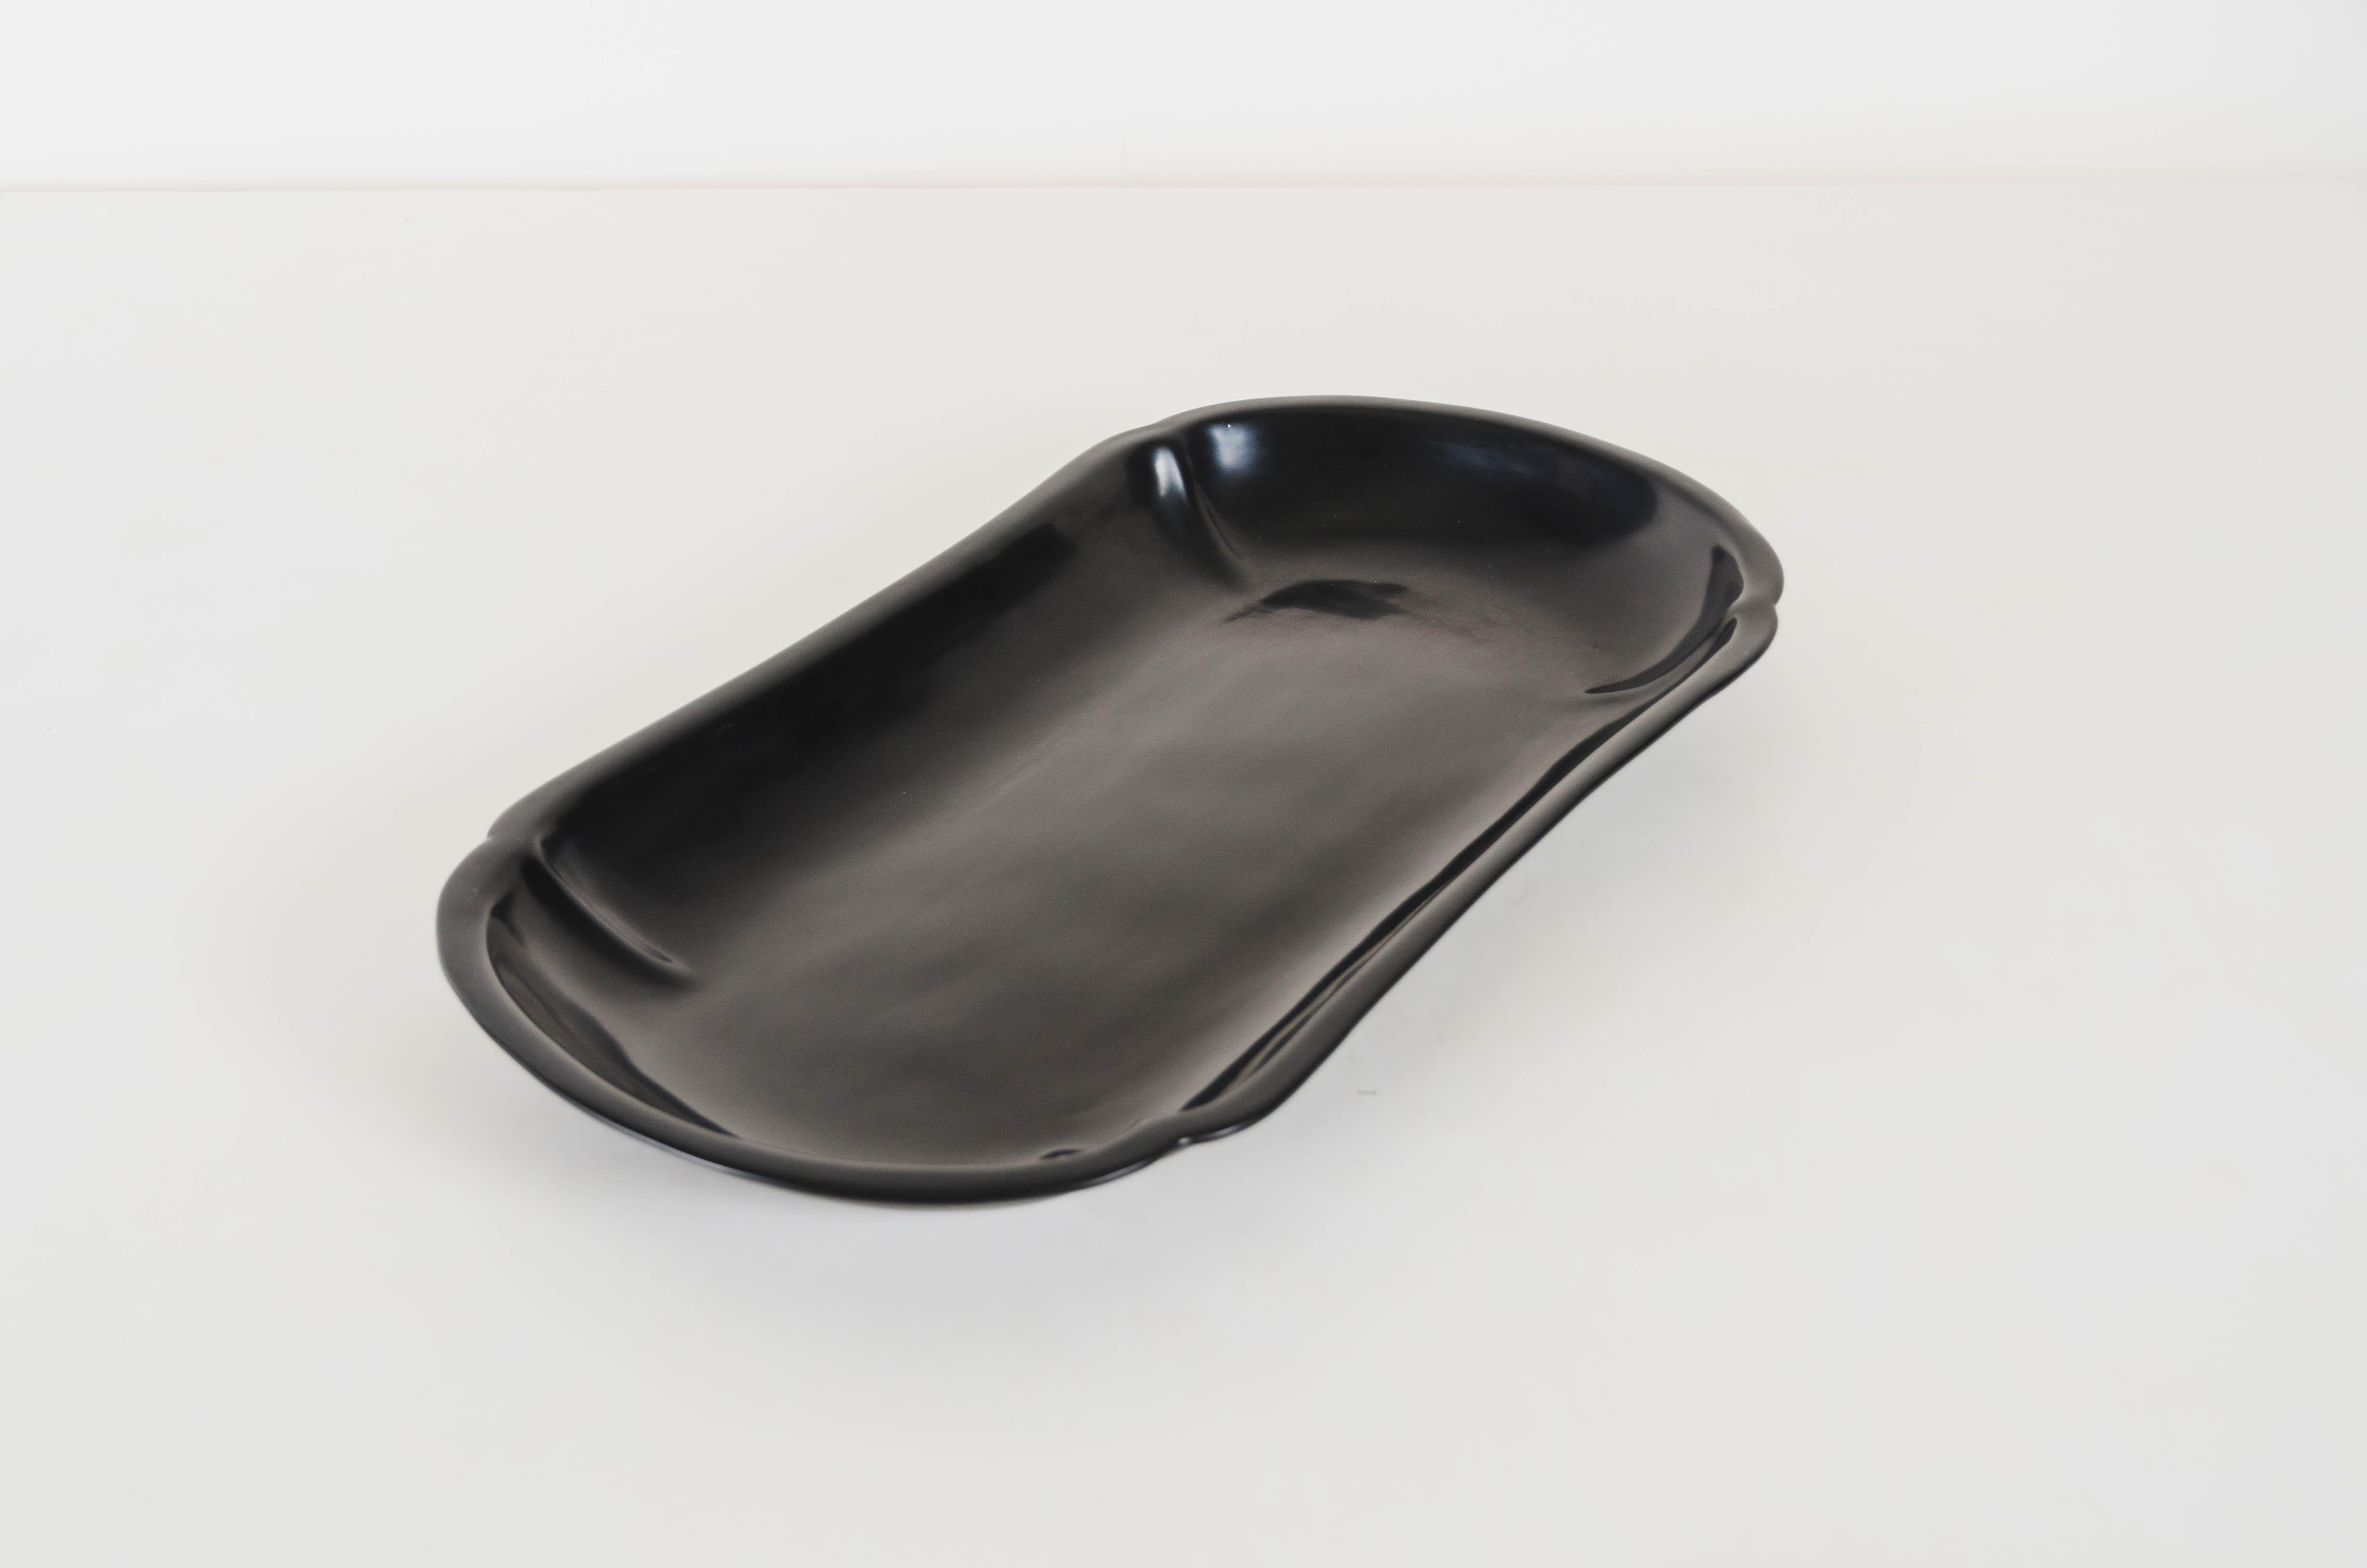 4 lobed oblong oval tray
Black lacquer
Hand made
Limited edition
Lacquer is a technique that dates back to the Shang dynasty, circa 1600-1100 B.C. These pieces are made with at least 60 coats of organic lacquer. Each layer of lacquer is applied